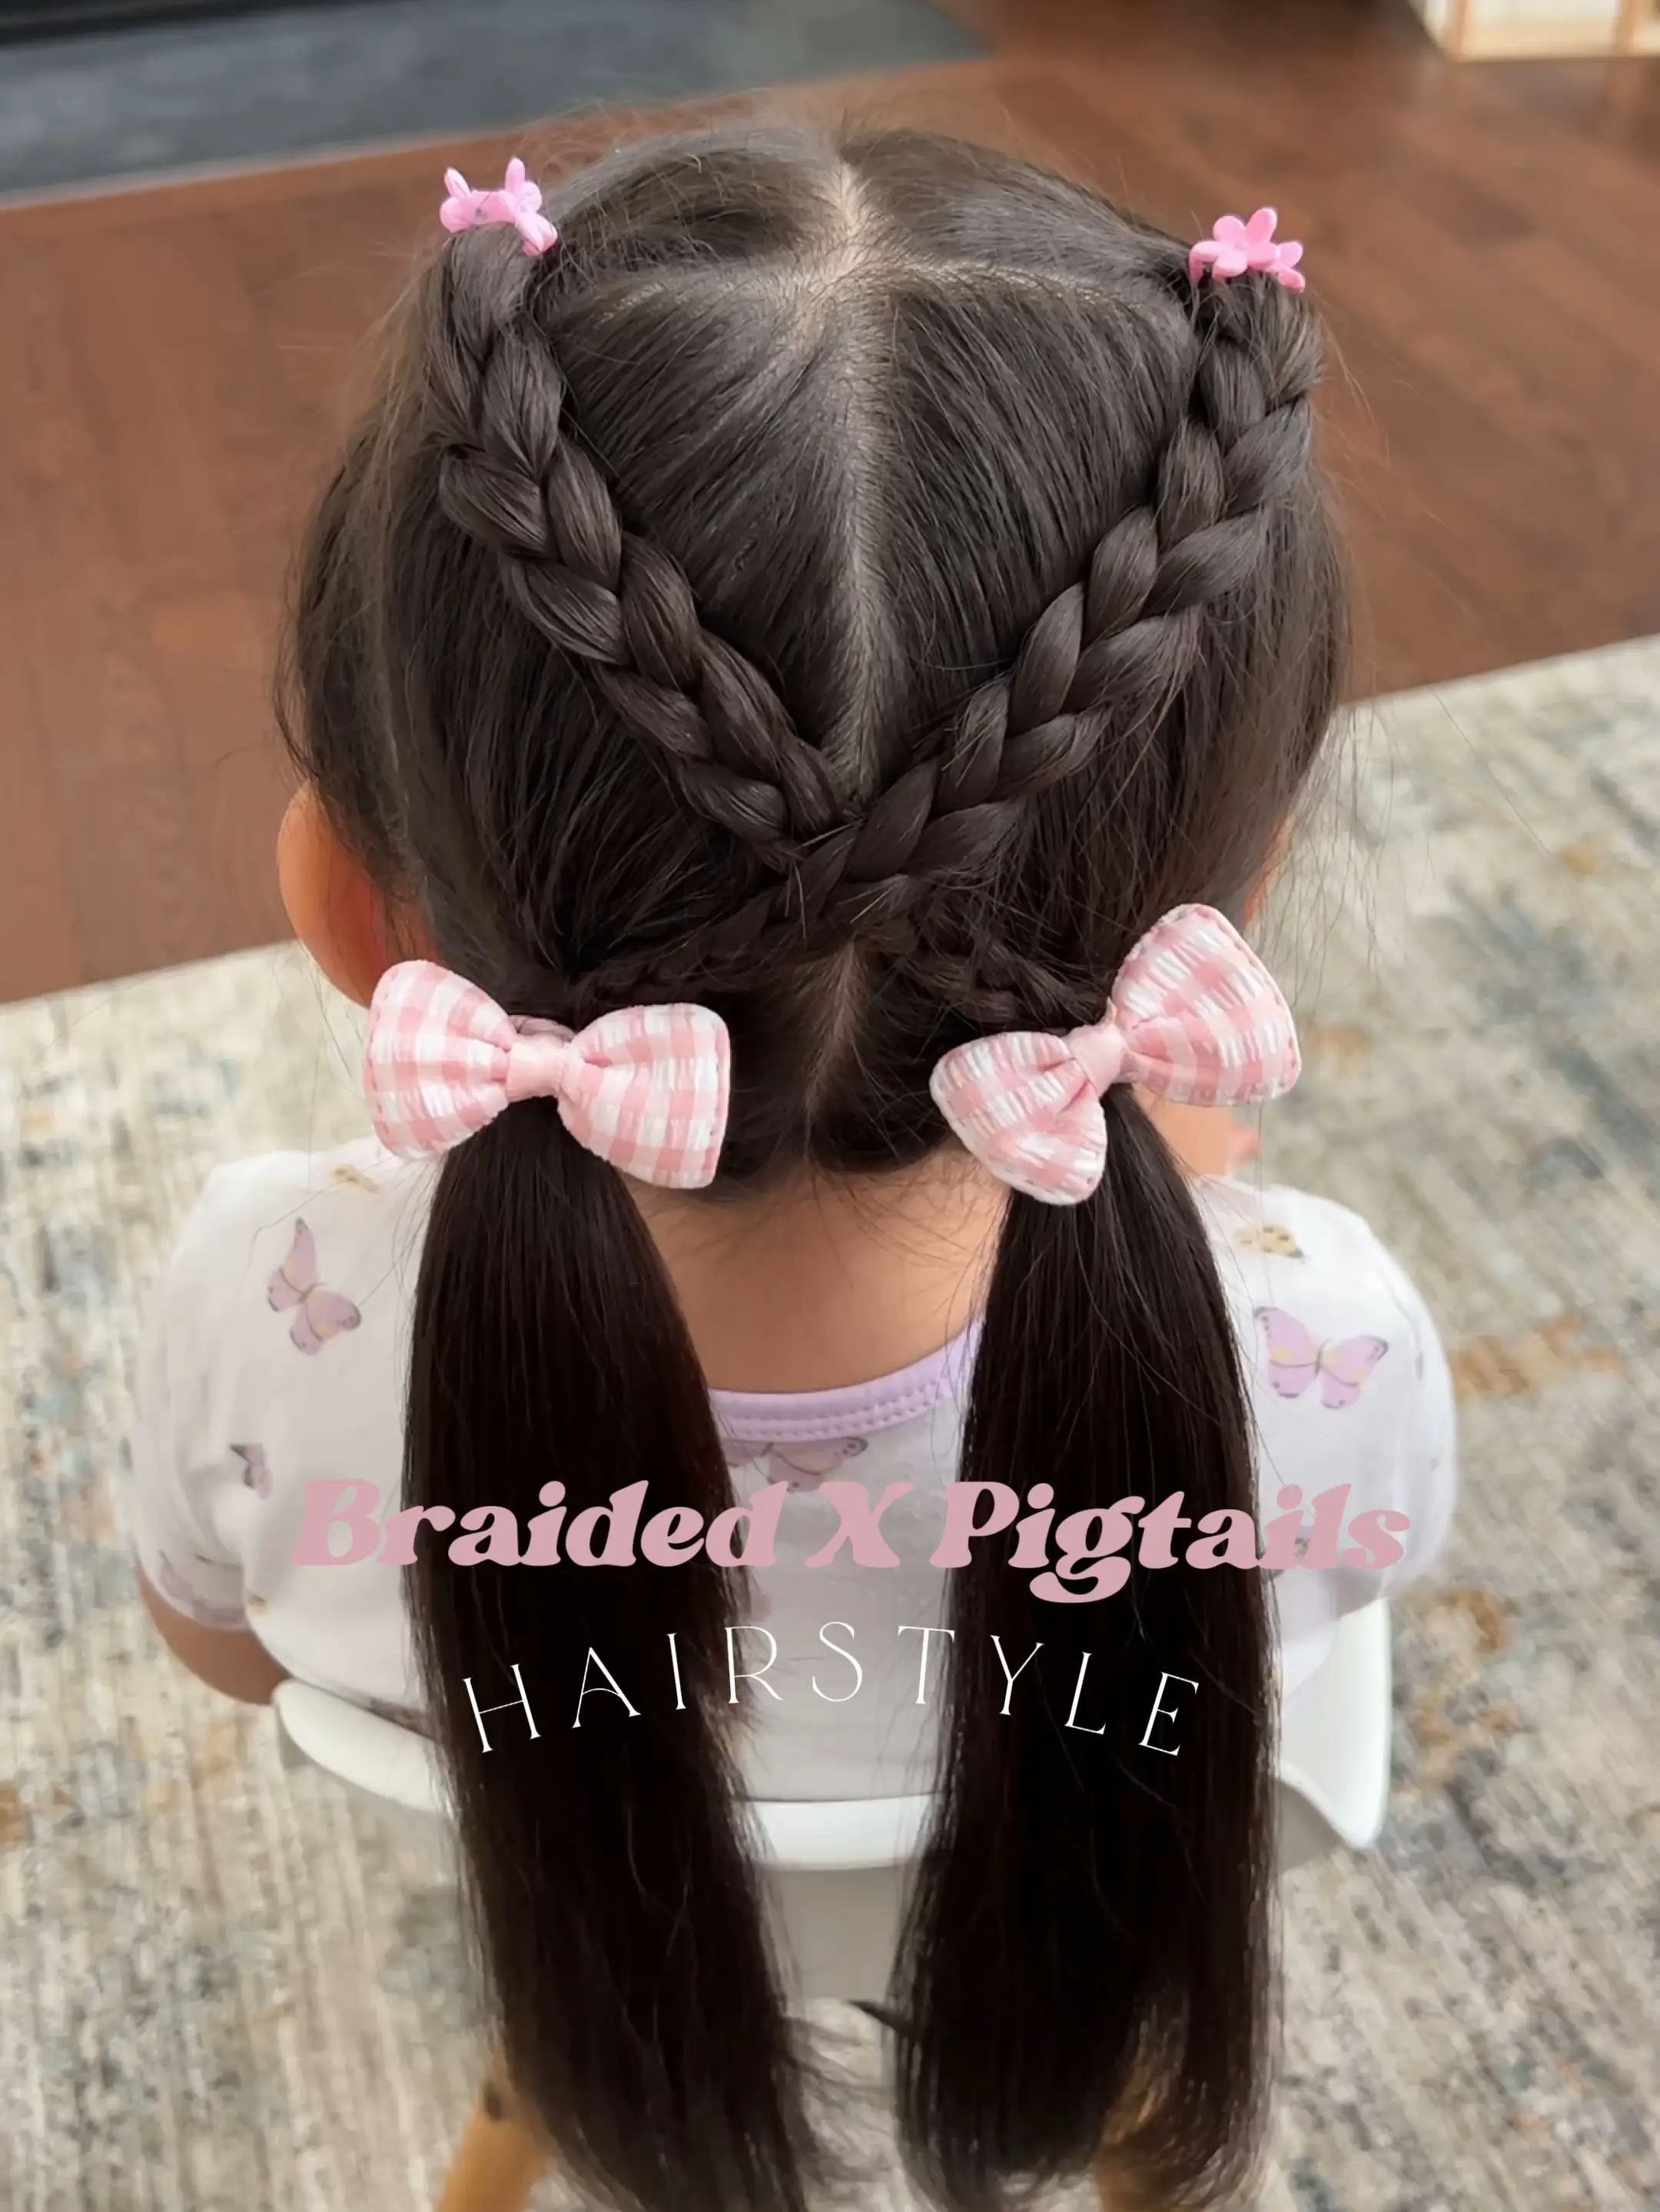 💕BRAIDED X PIGTAILS💕, Video published by Liz Pak